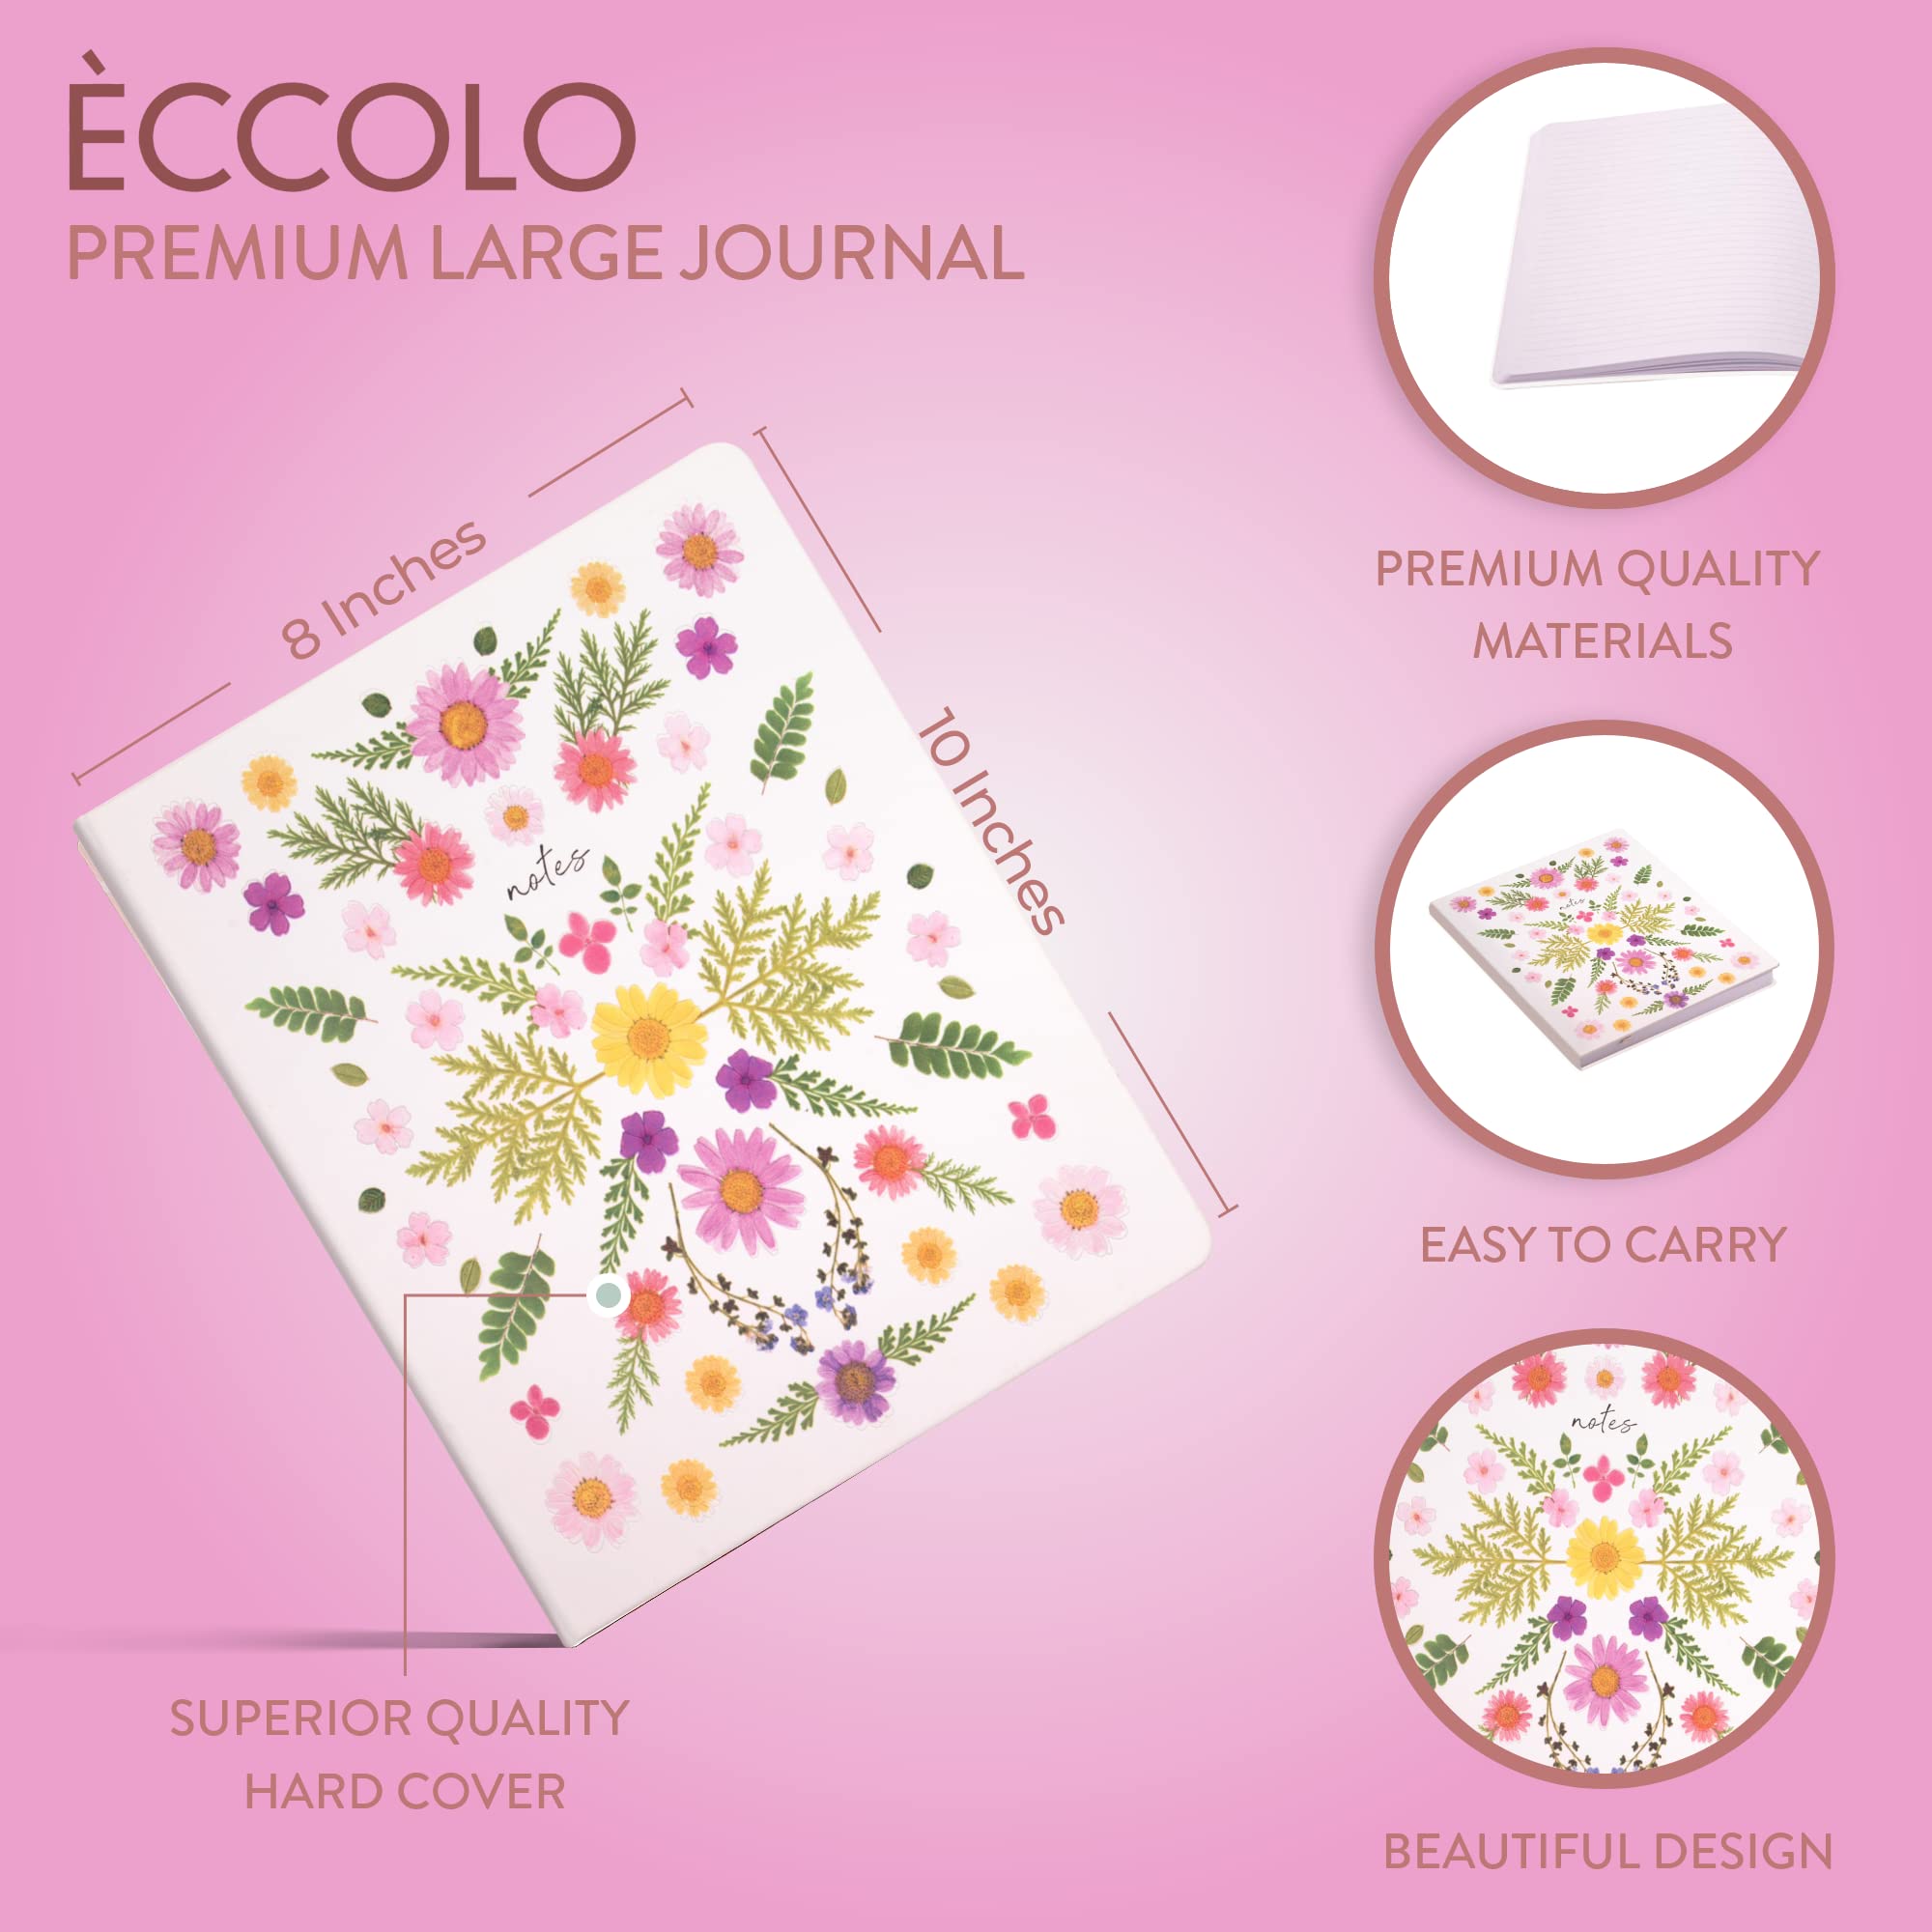 Floral Design on Eccolo Journal Cover